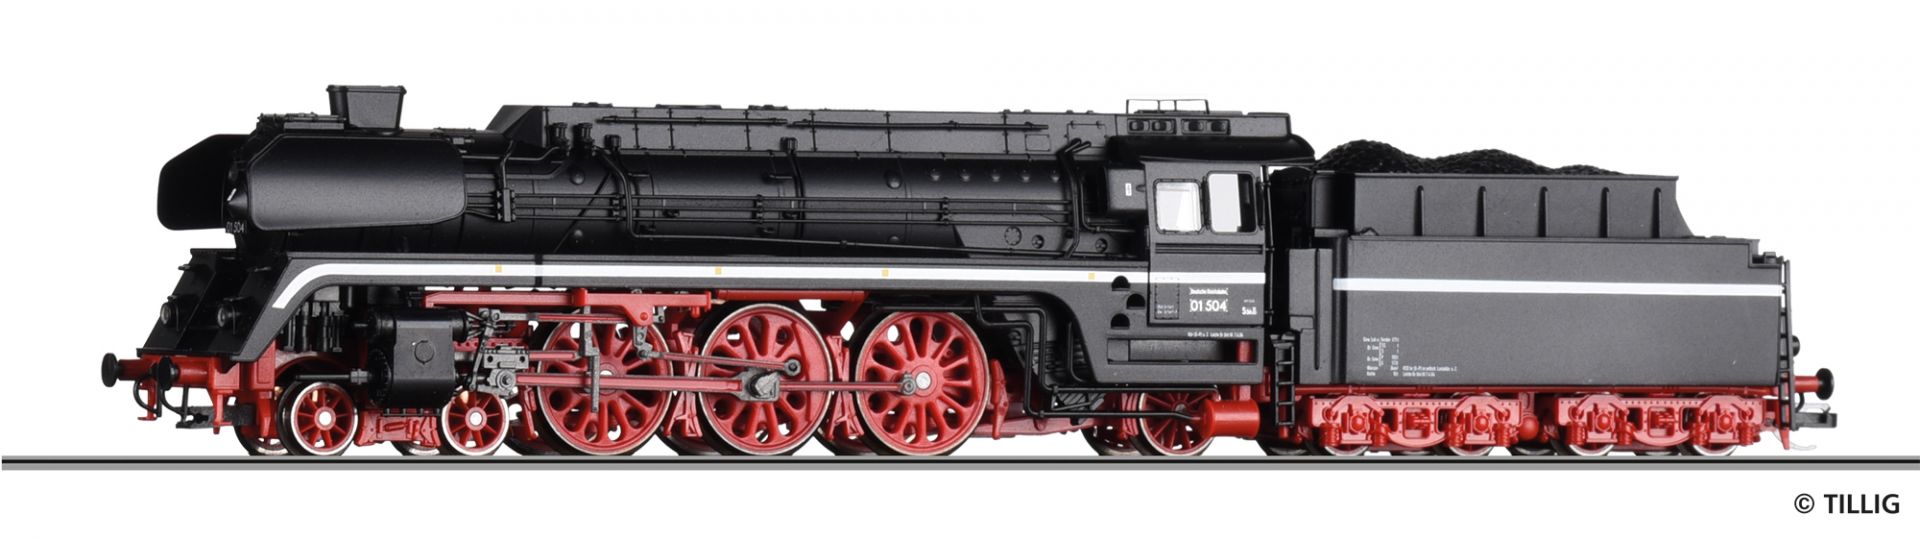 502166 | Steam locomotive DR -sold out-